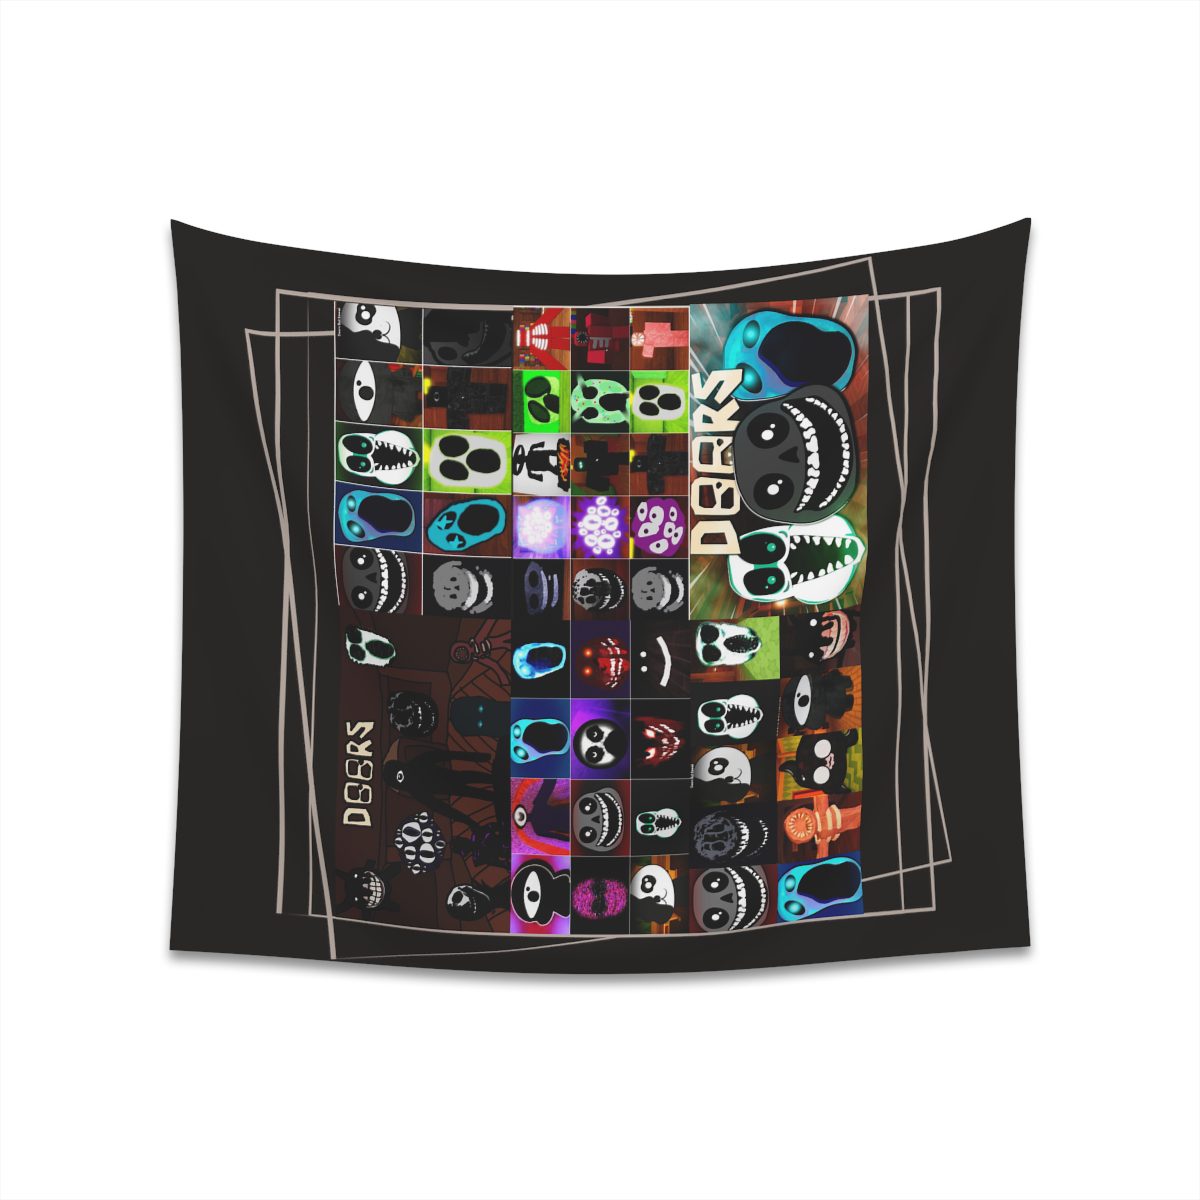 Invite your friends to a terrifying Halloween party with the DOOR ROBLOX horror tapestries.  Printed Wall Tapestry Cool Kiddo 22